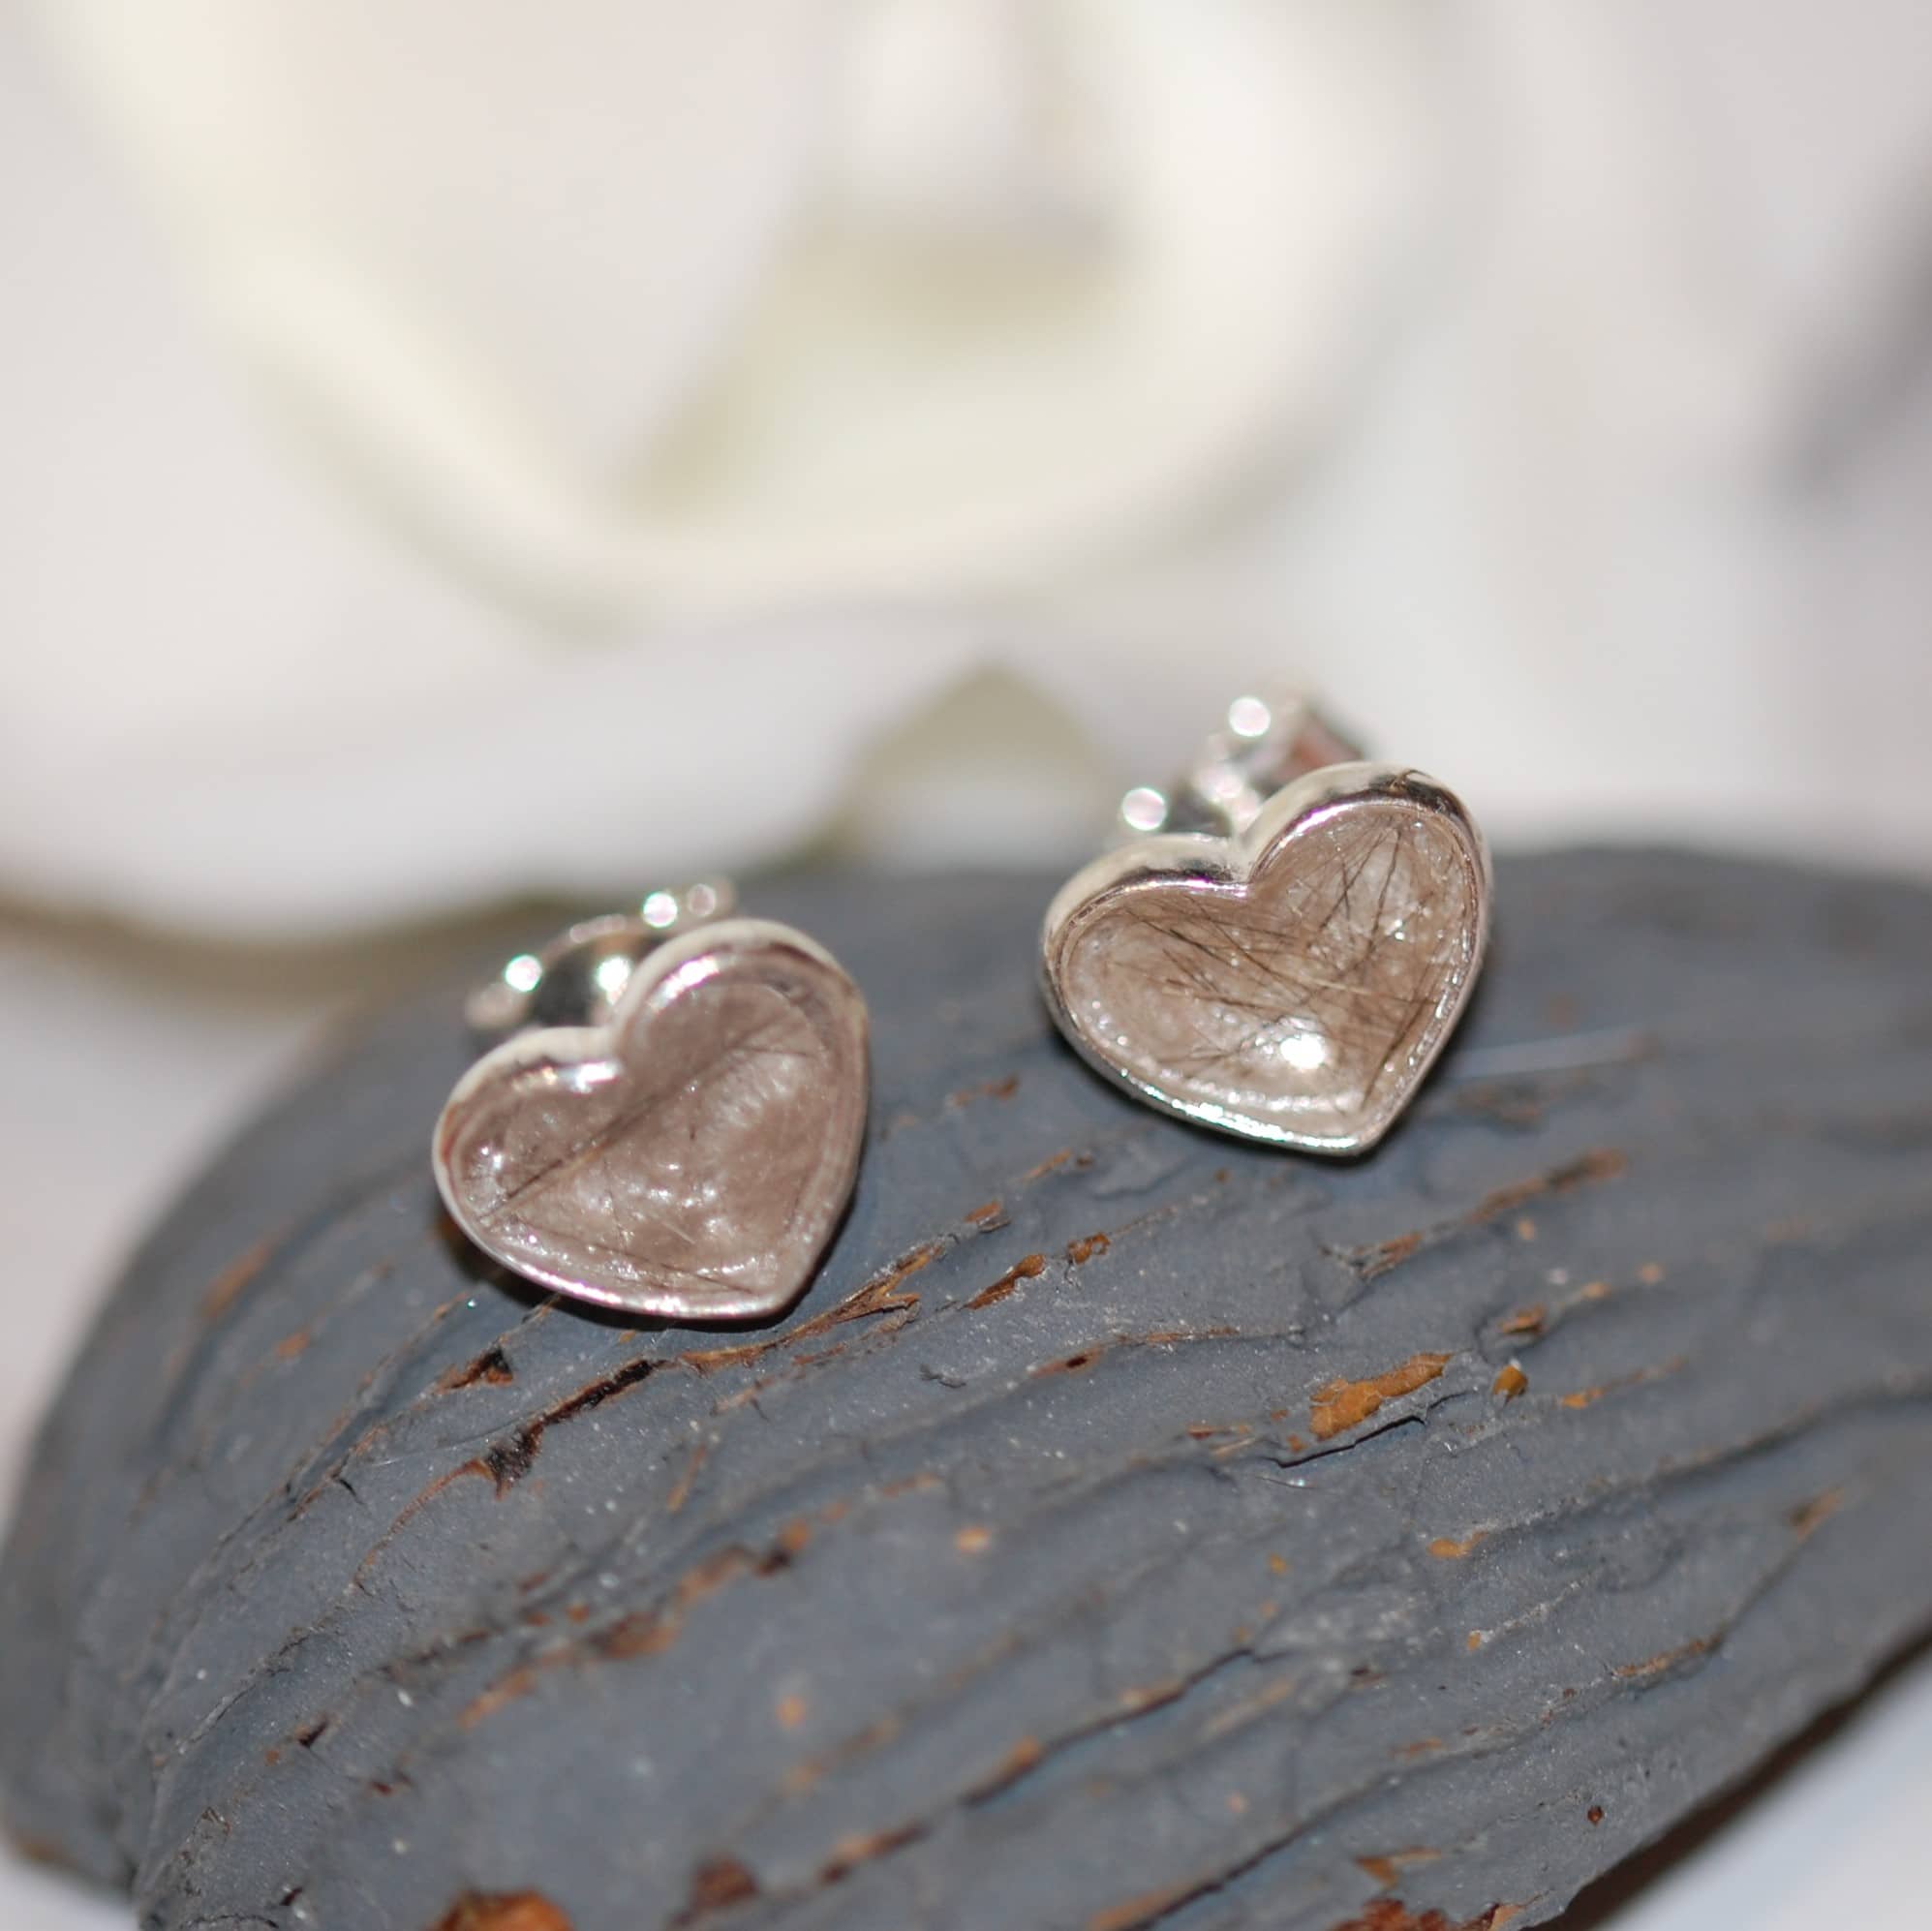 Silver heart stud earrings with pet fur or cremation ashes